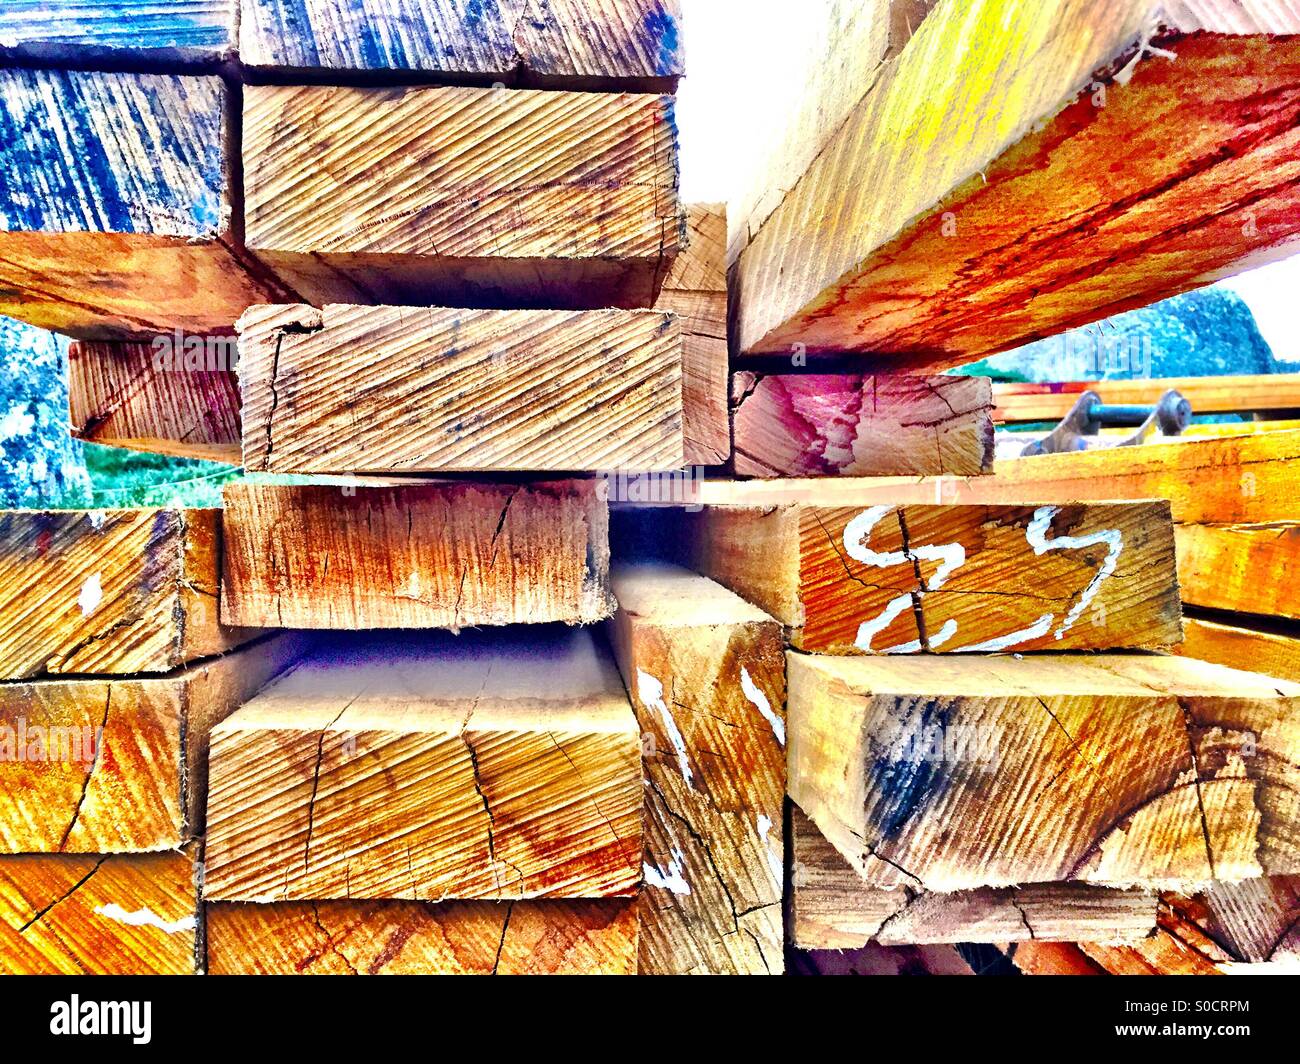 A pile of cut timber on a construction site Stock Photo